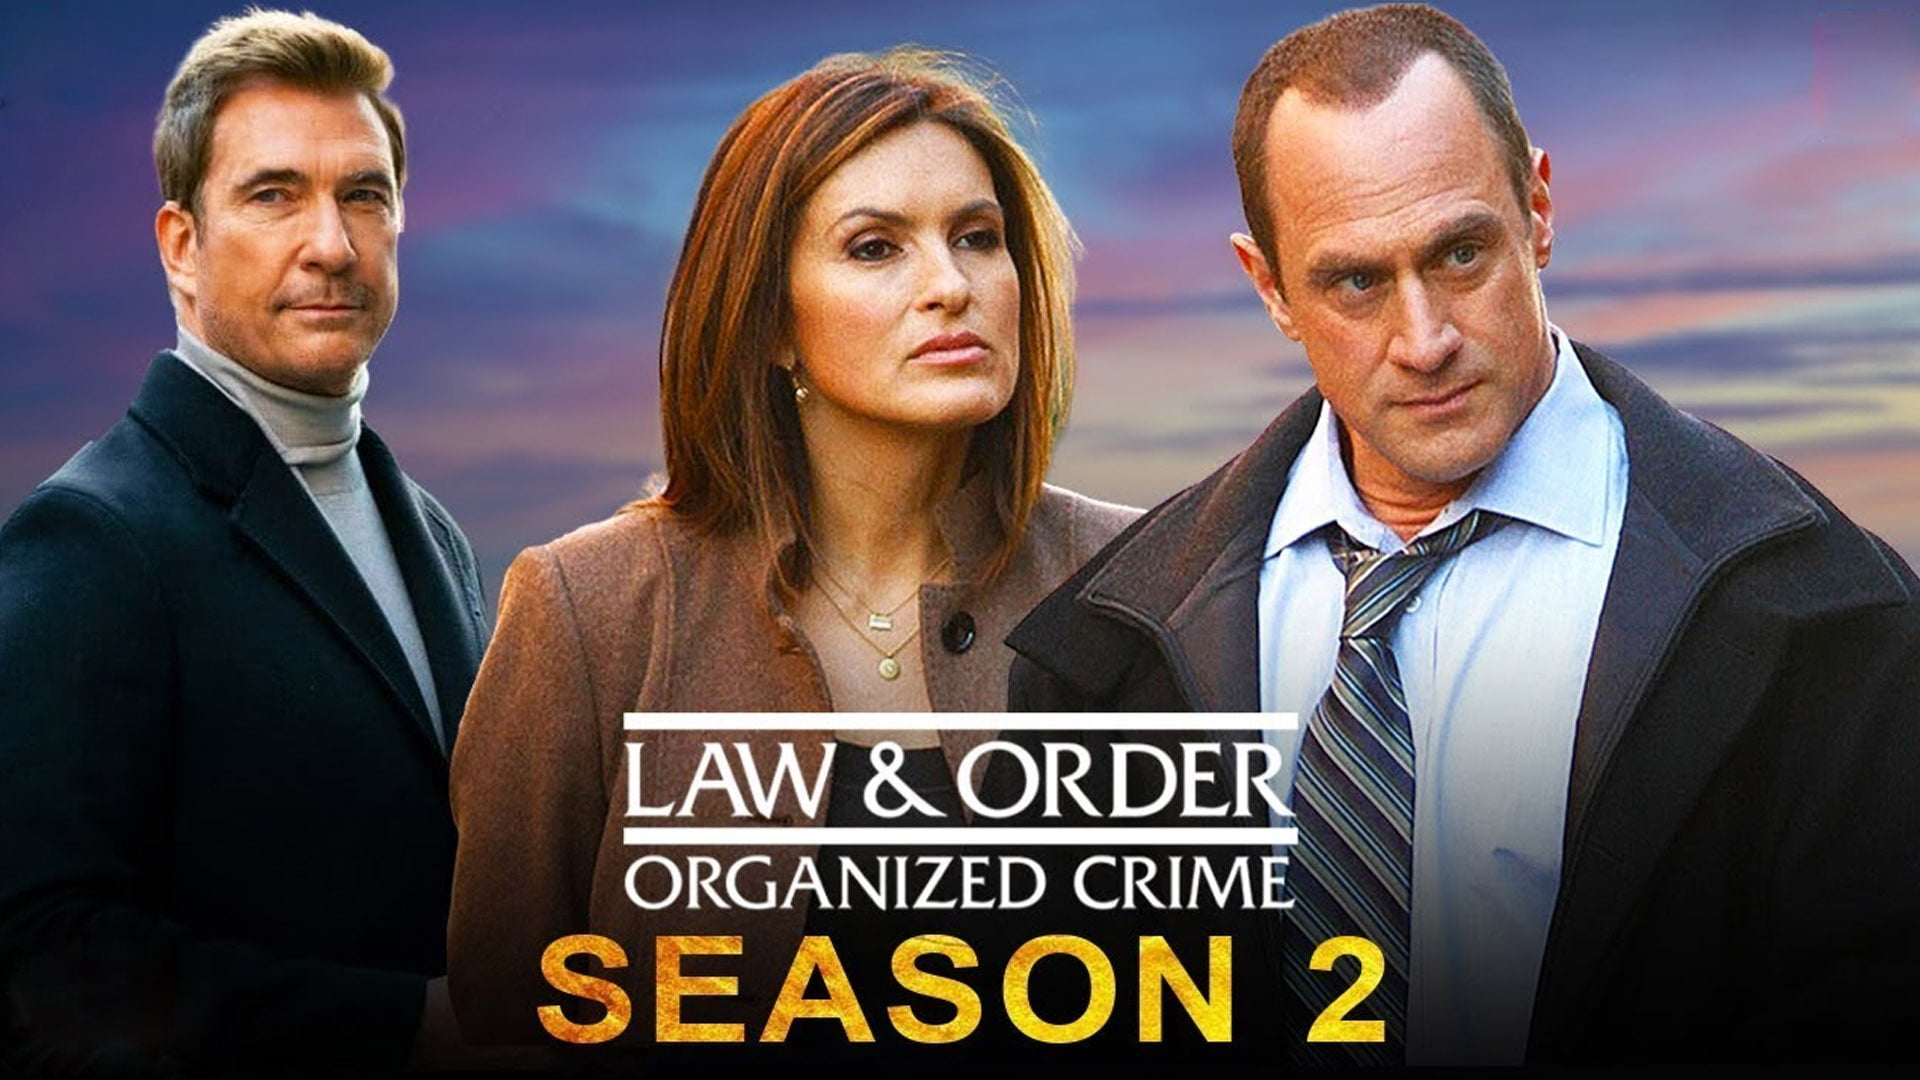 Law and order organized crime